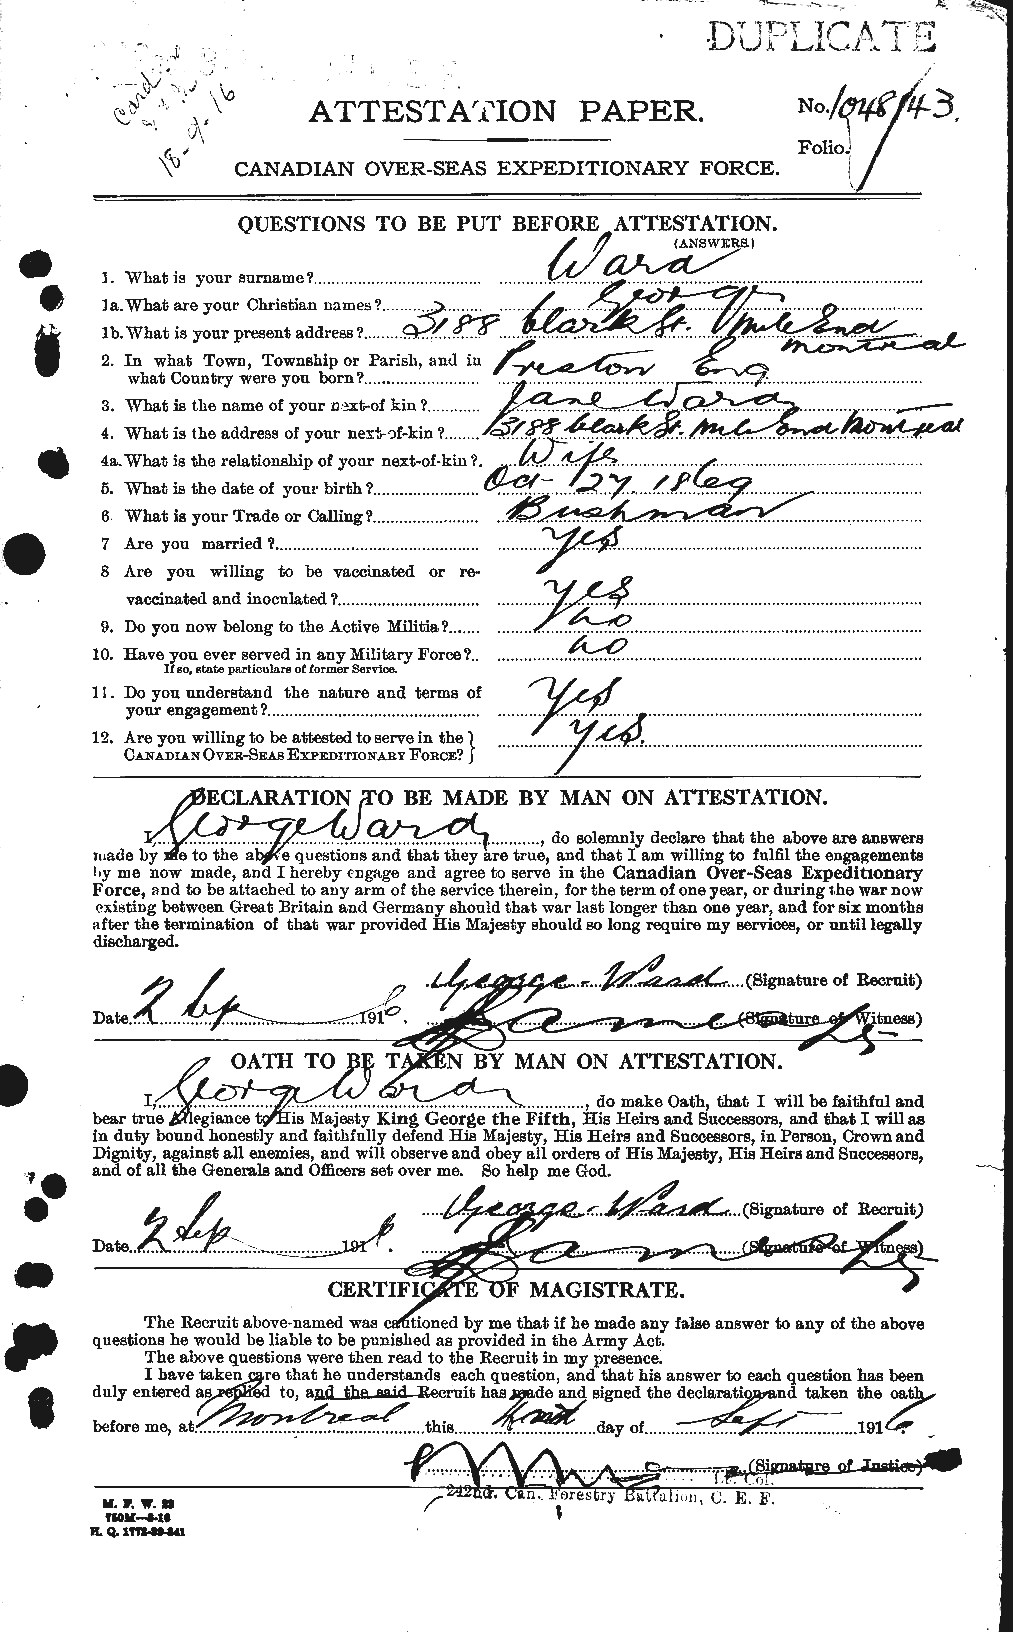 Personnel Records of the First World War - CEF 657755a